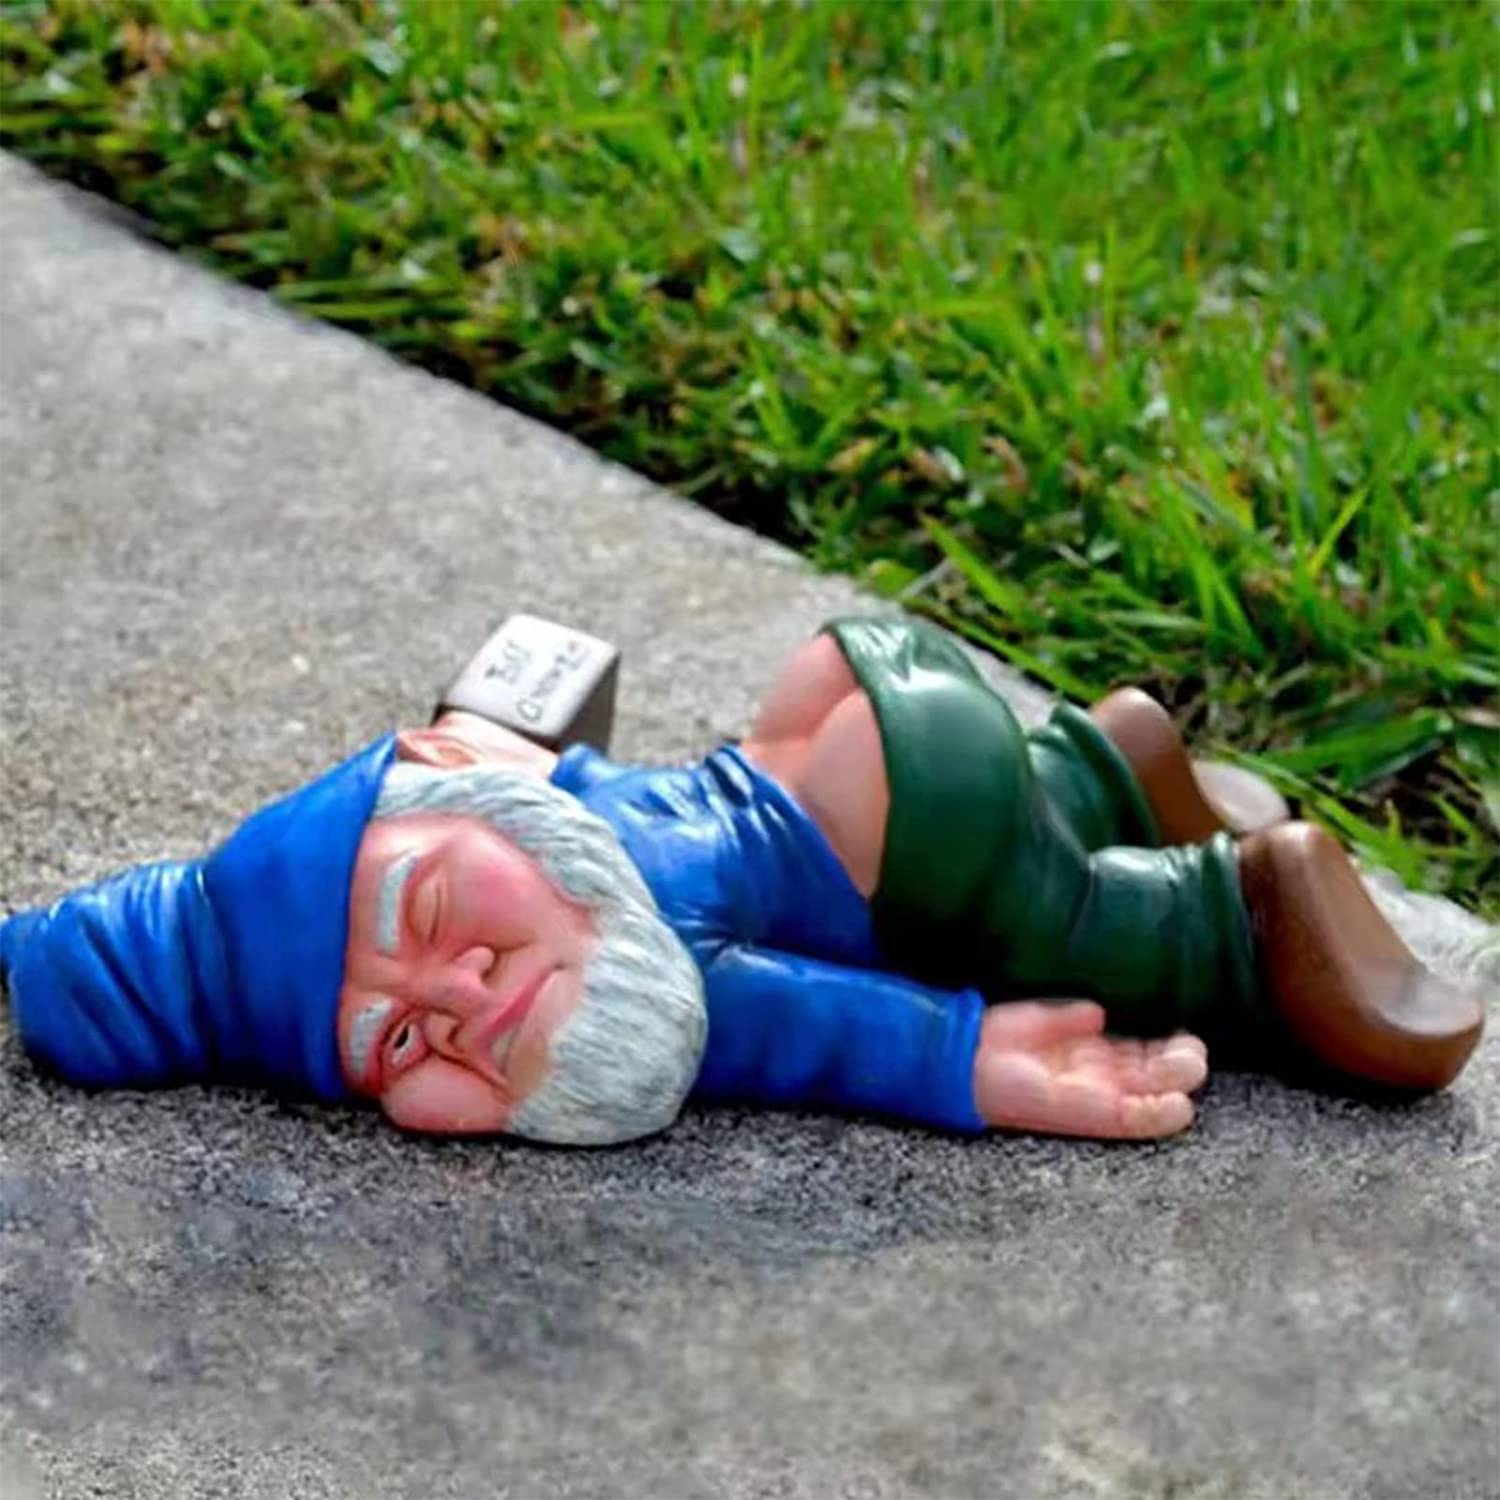 Funny Garden Gnomes Outdoor Statues, 9.5 Inch